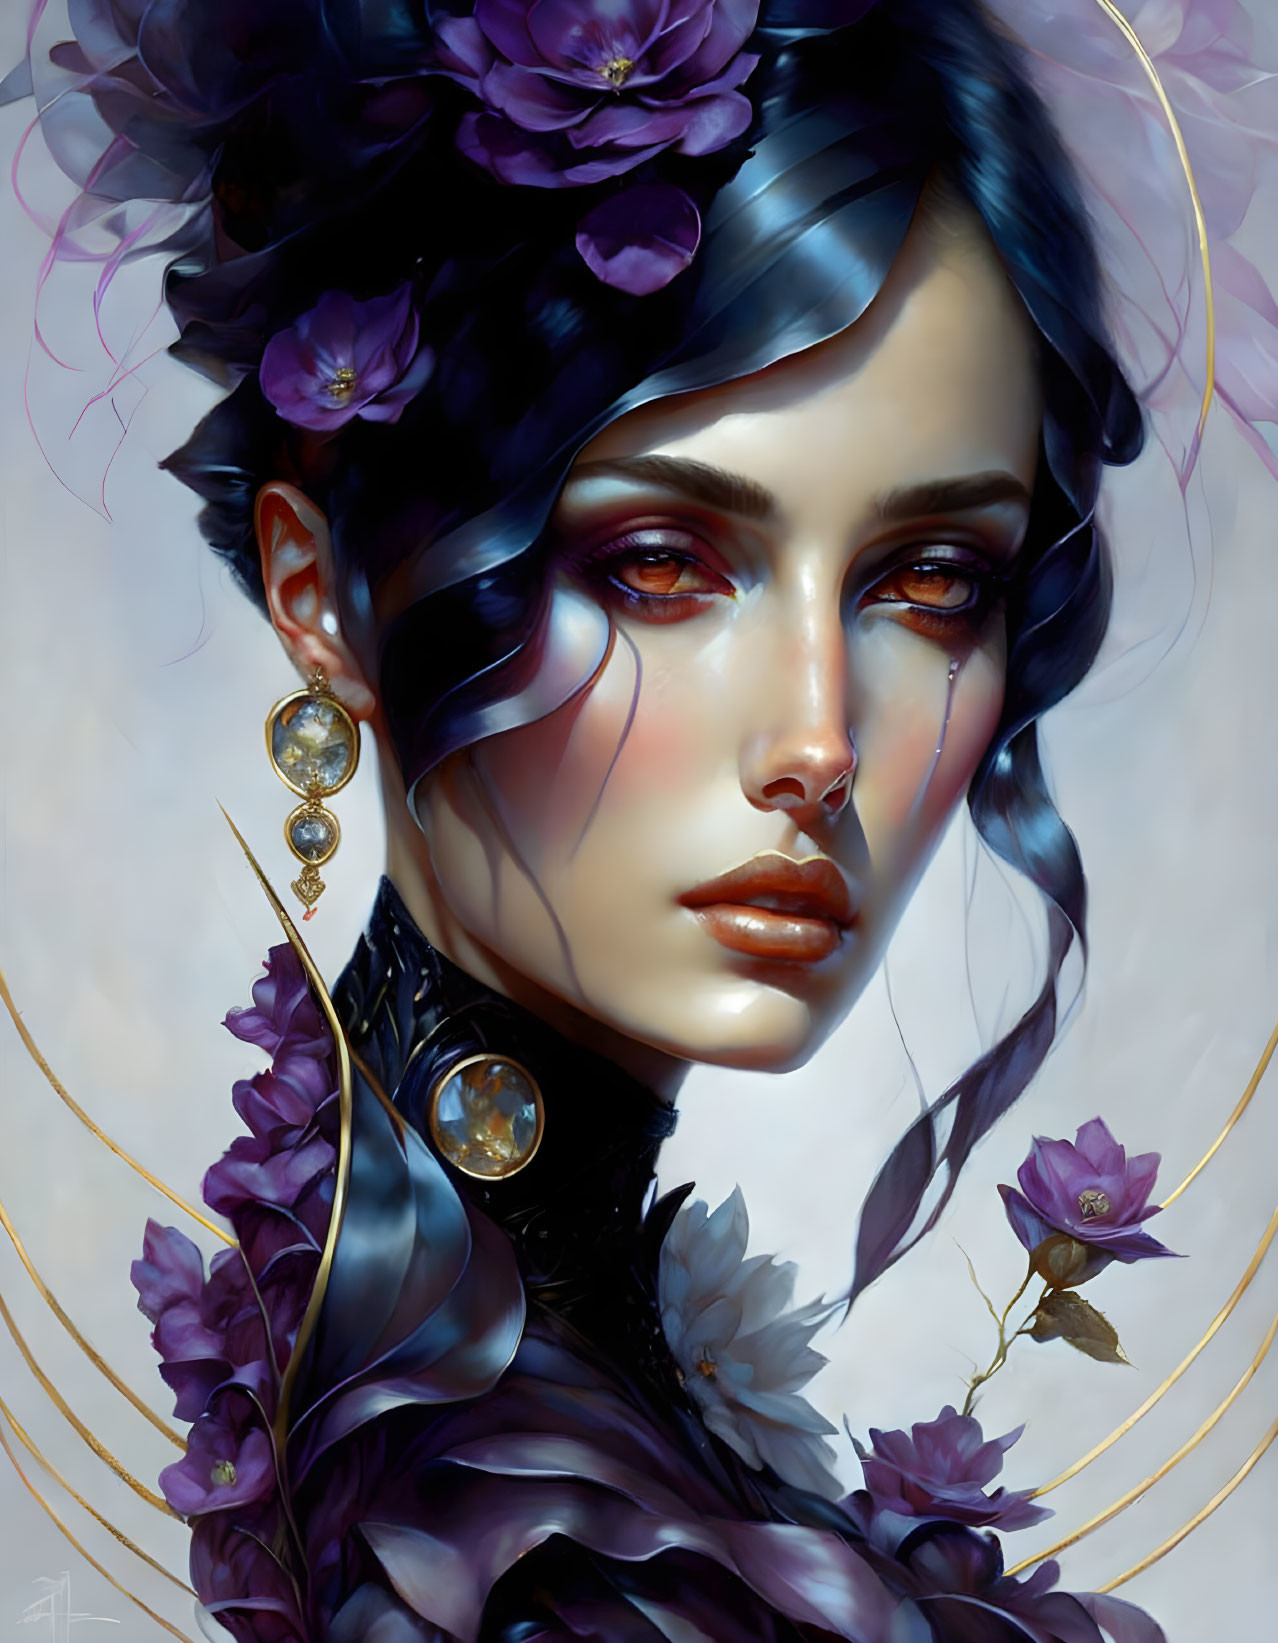 Woman portrait with blue and purple floral hair accents and red eye makeup.